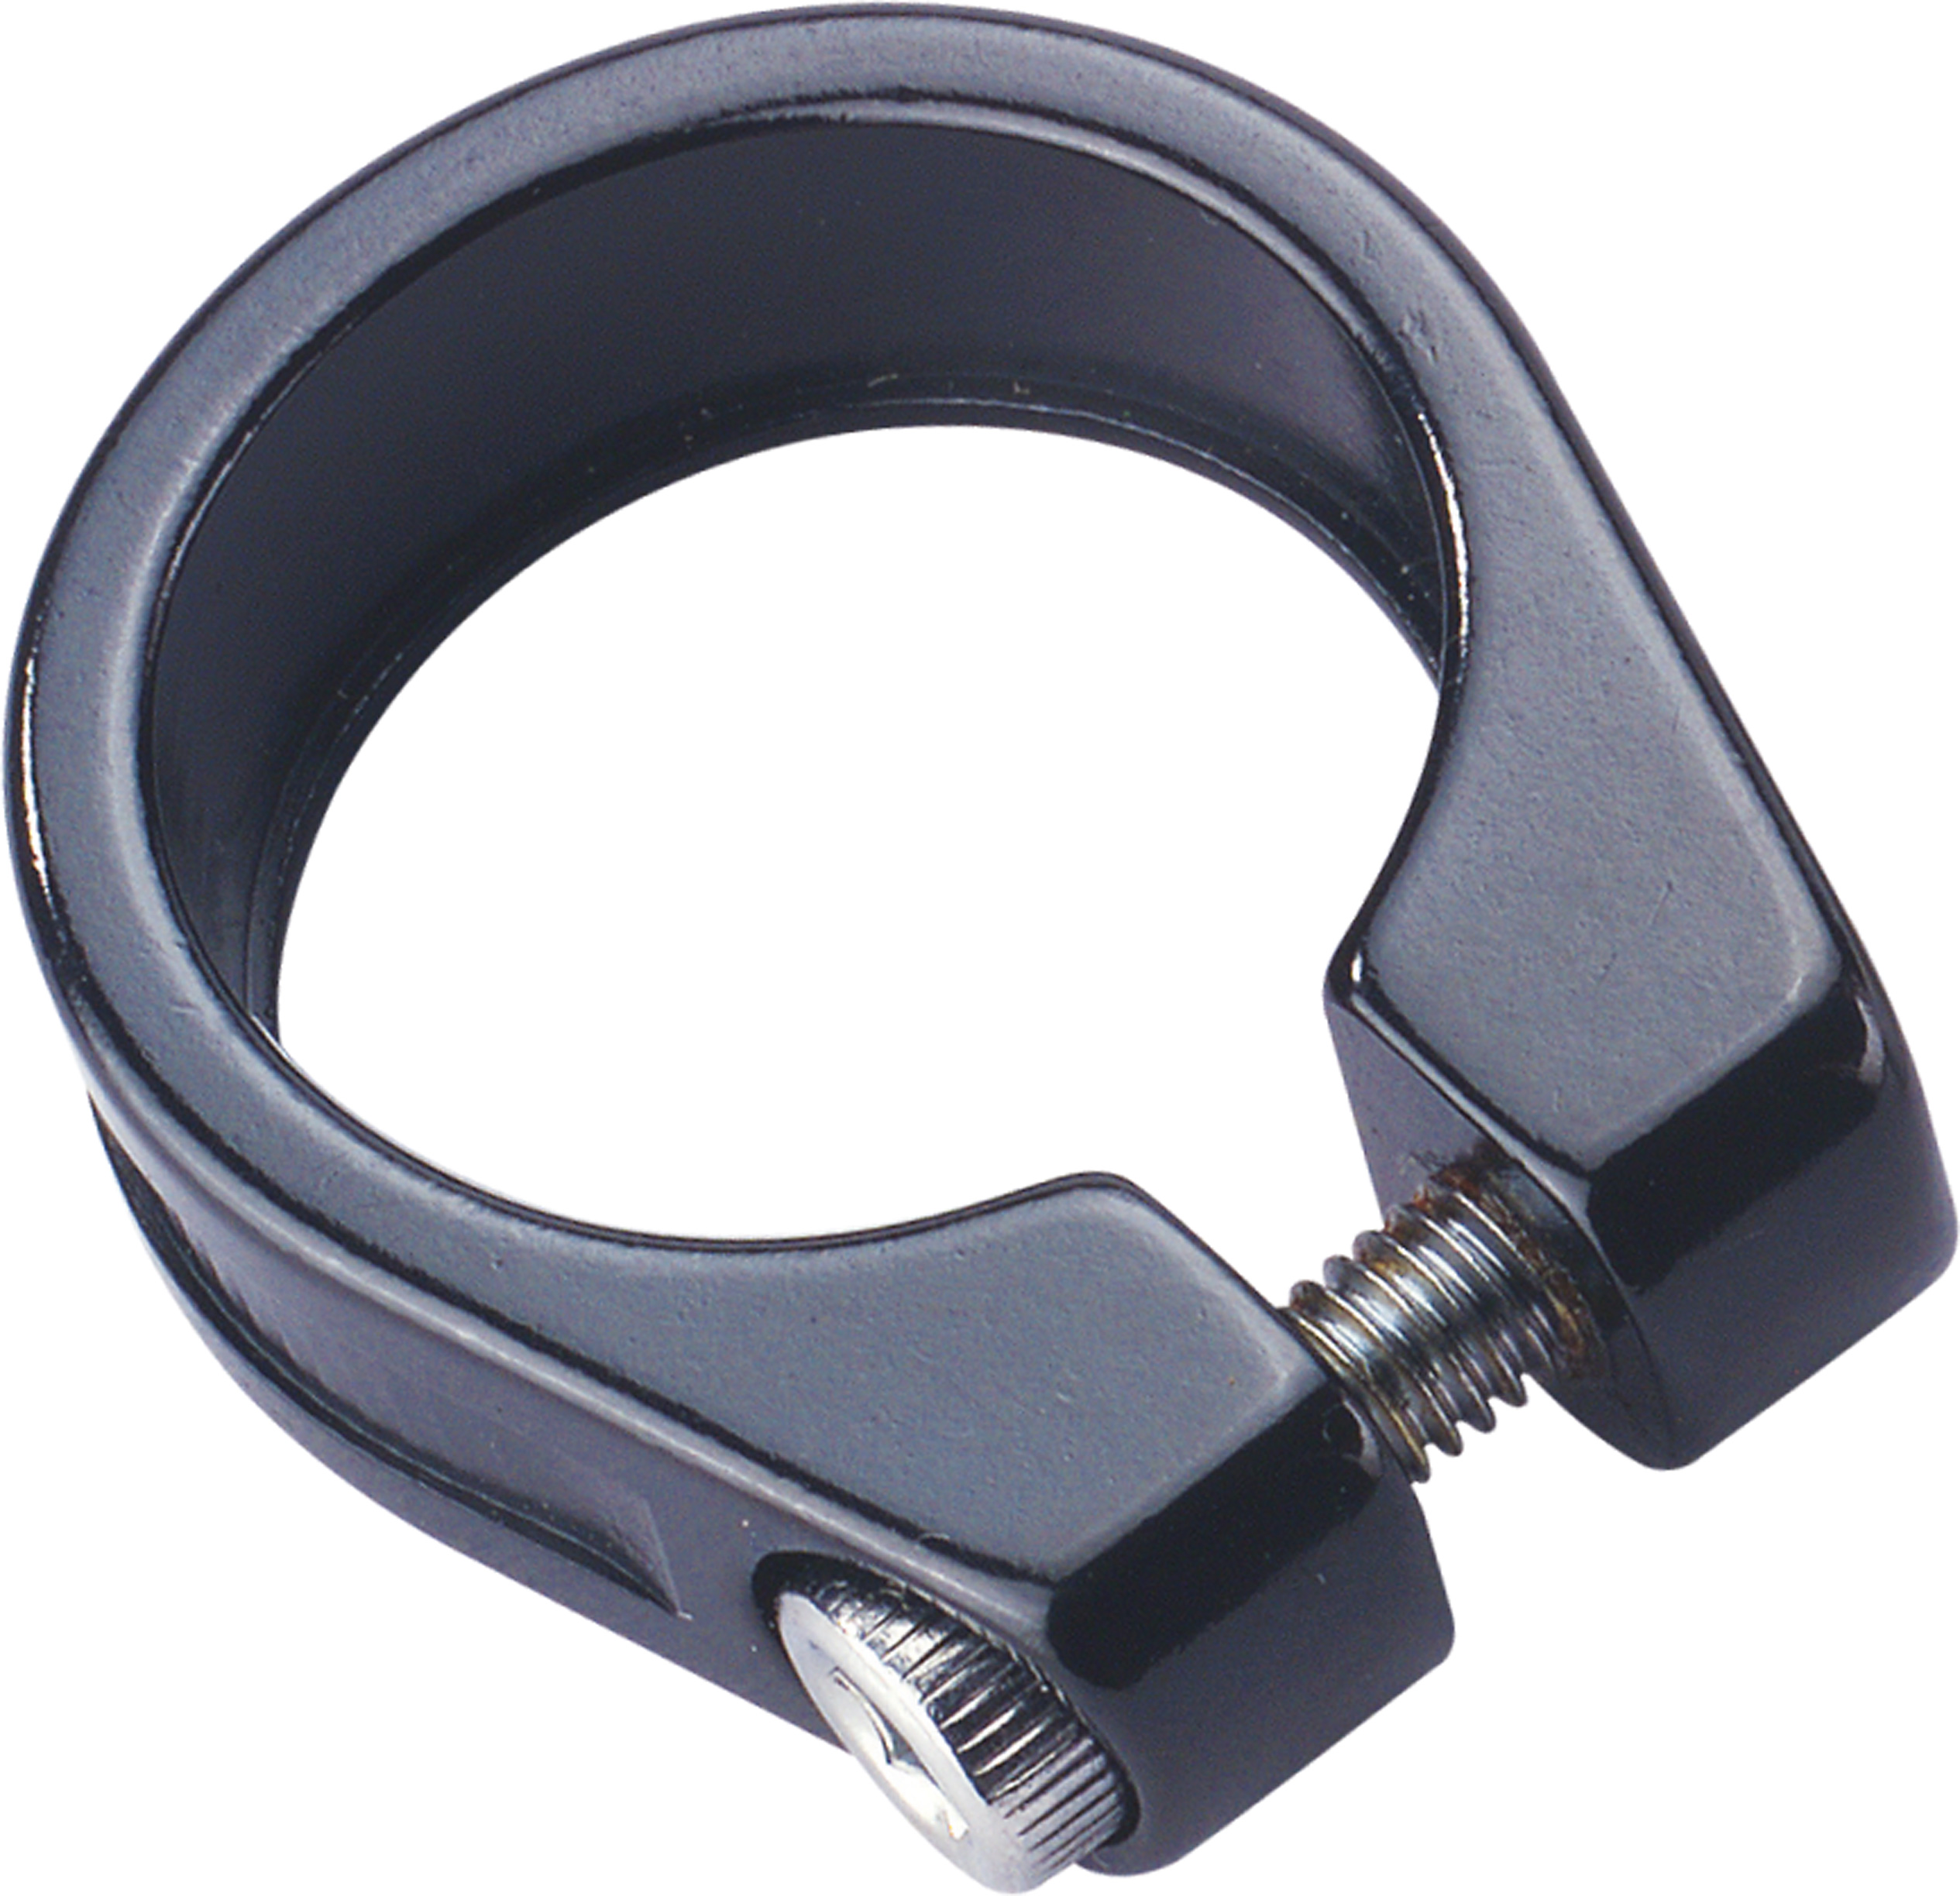 AQR23052Z Acor Black 29.8mm Forged Alloy Bolt Seat Clamp